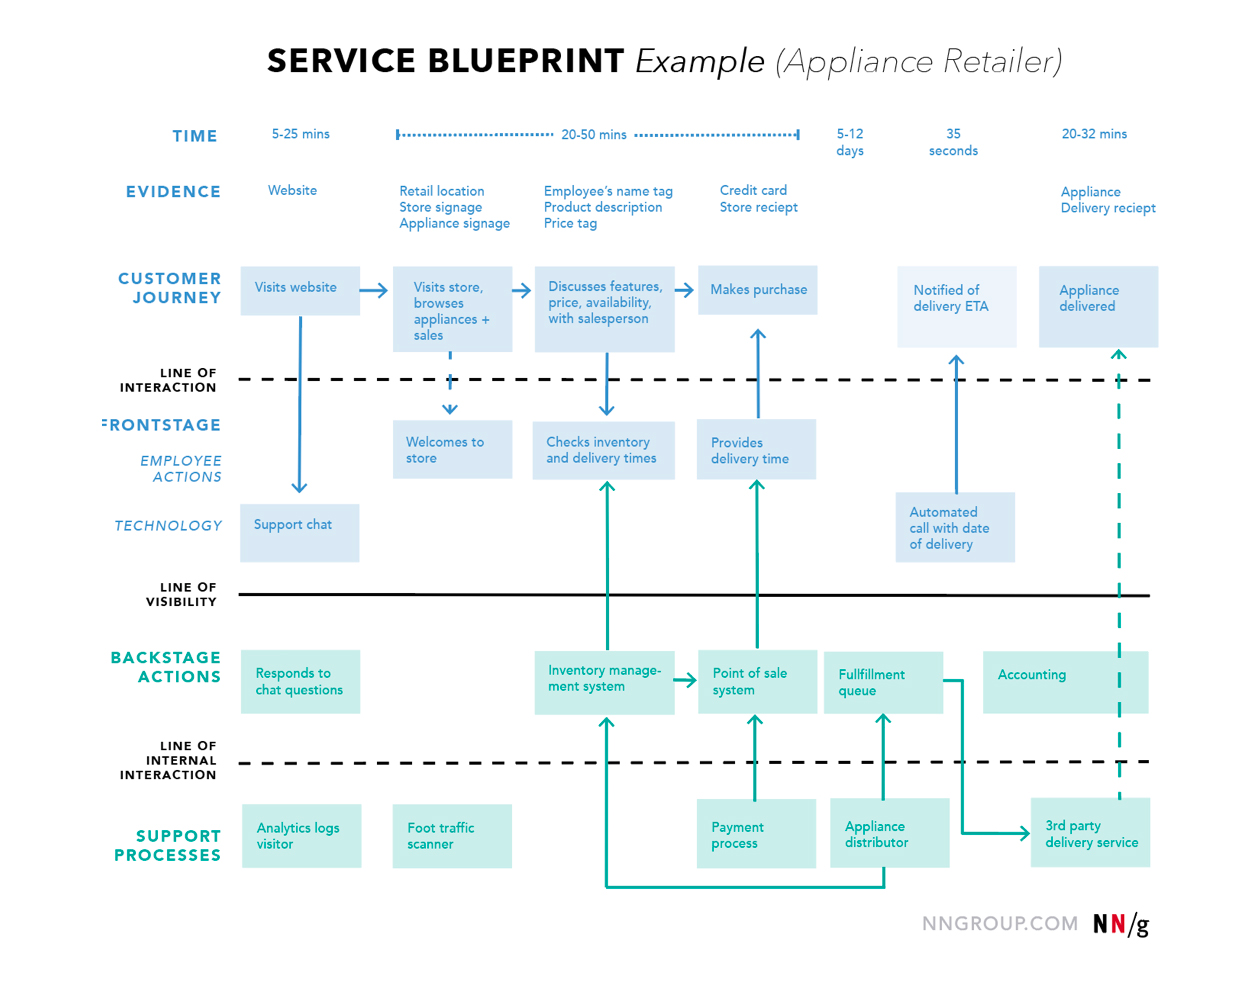 An example of the service blueprint customer journey map by NNGroup